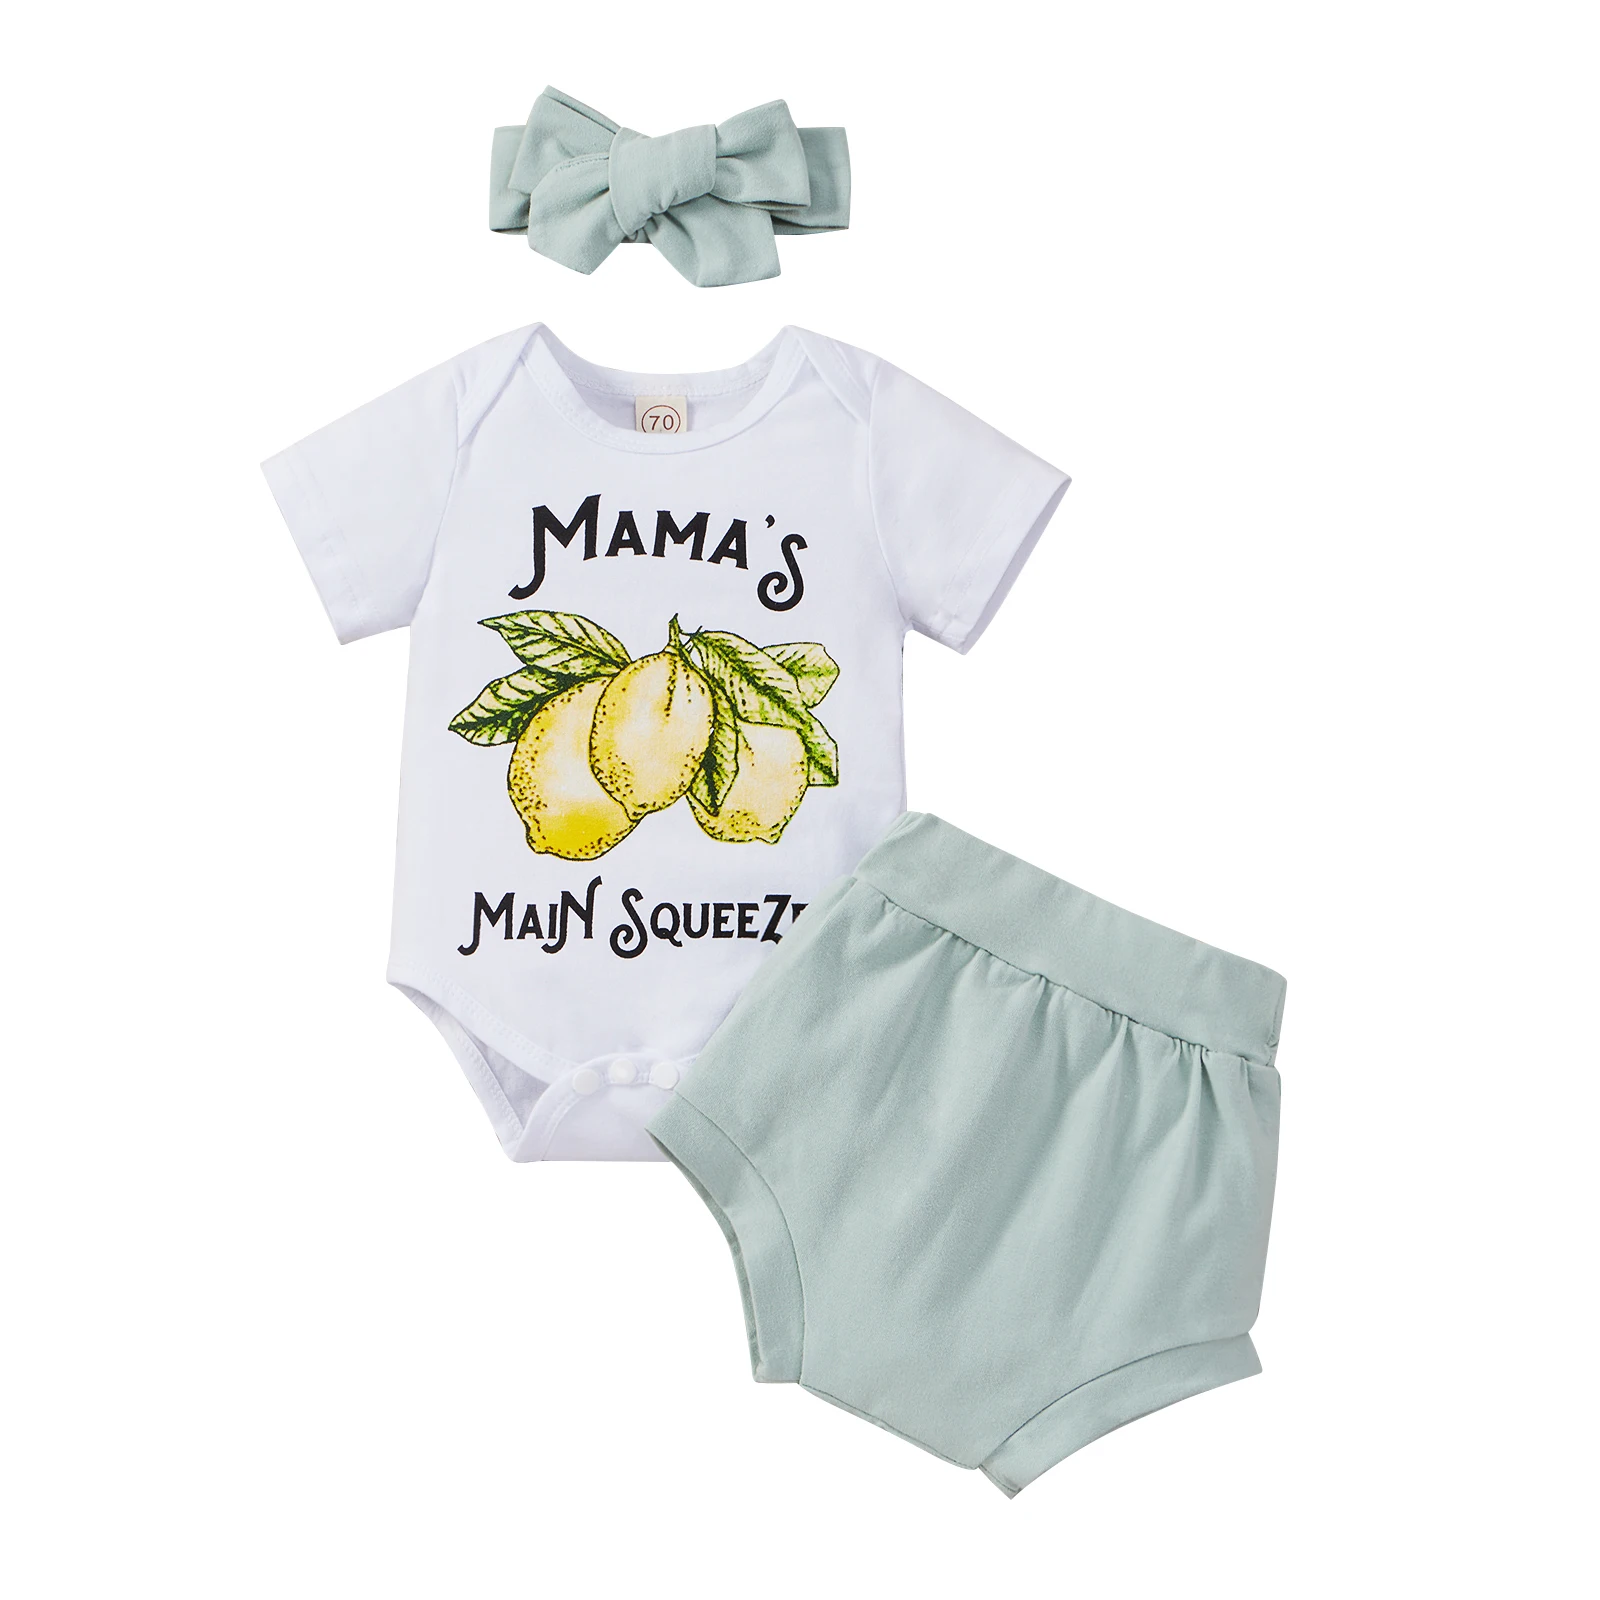 Mama's main squeeze outfit